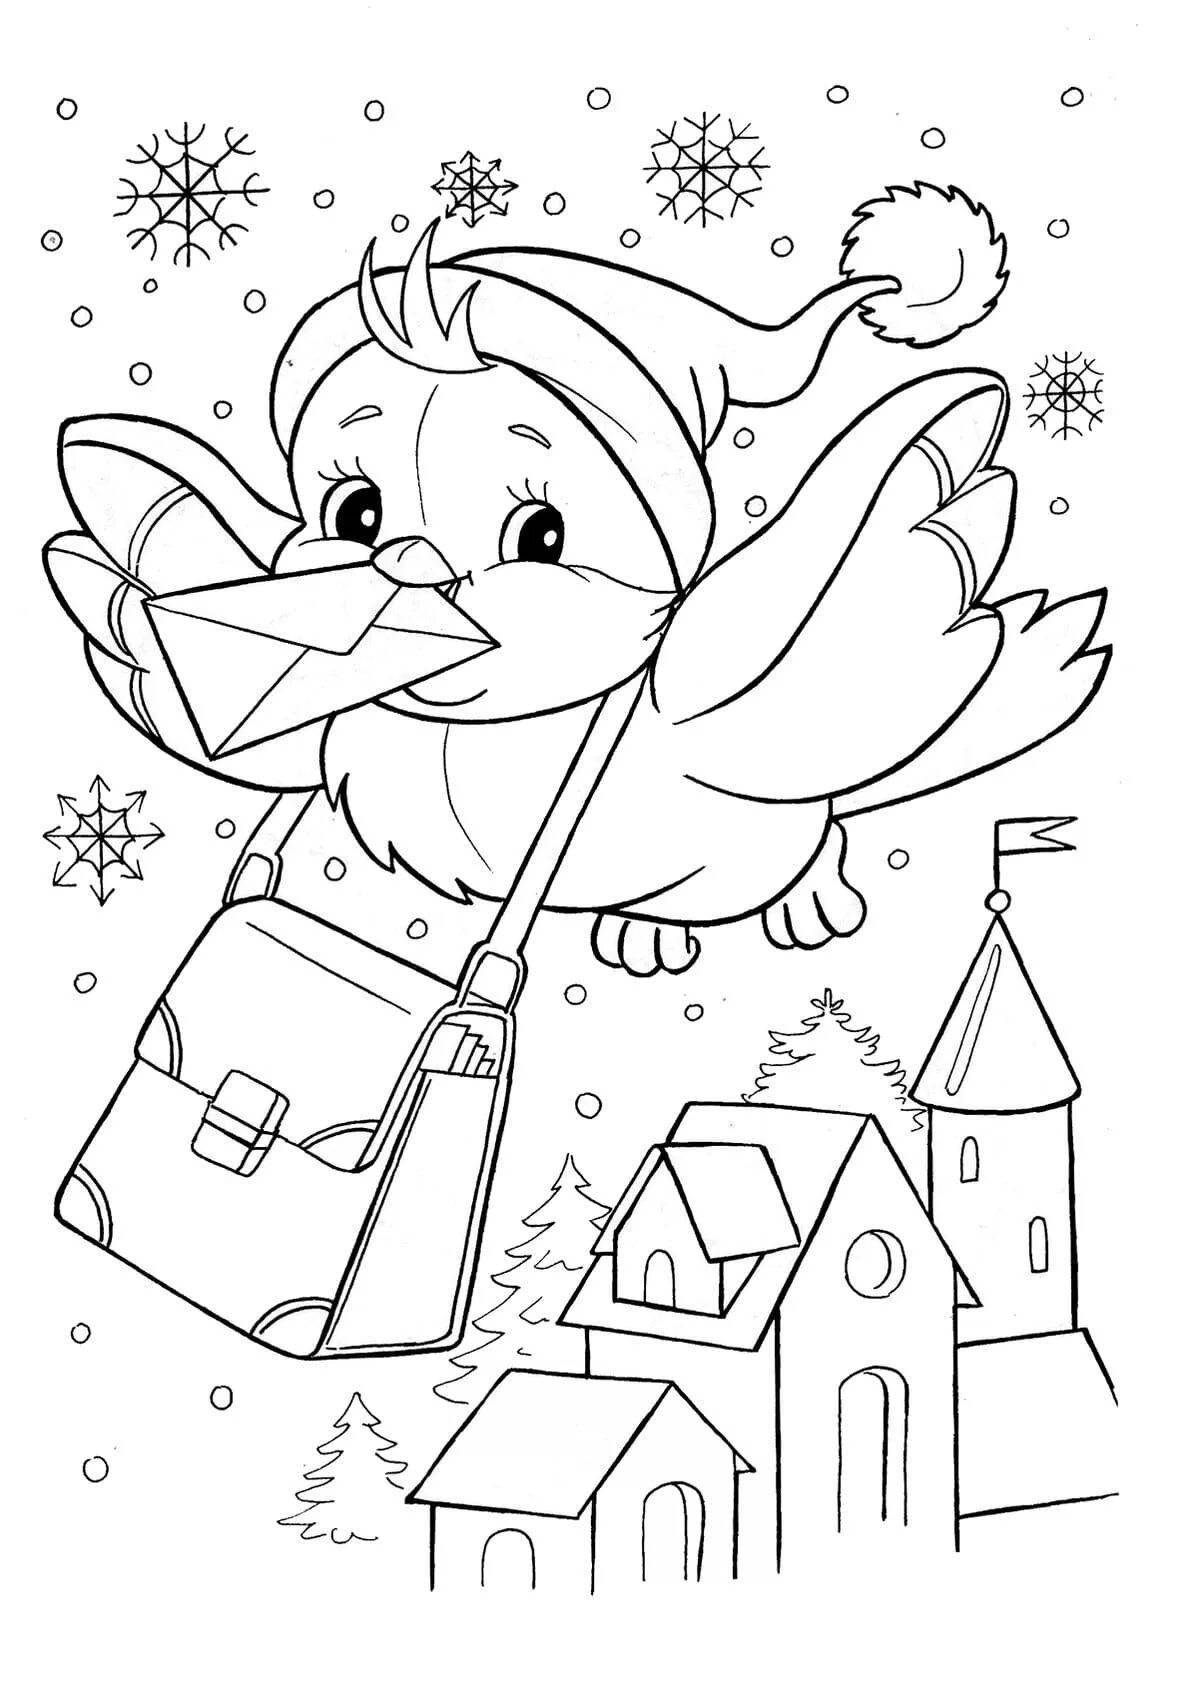 Whimsical winter Christmas coloring book